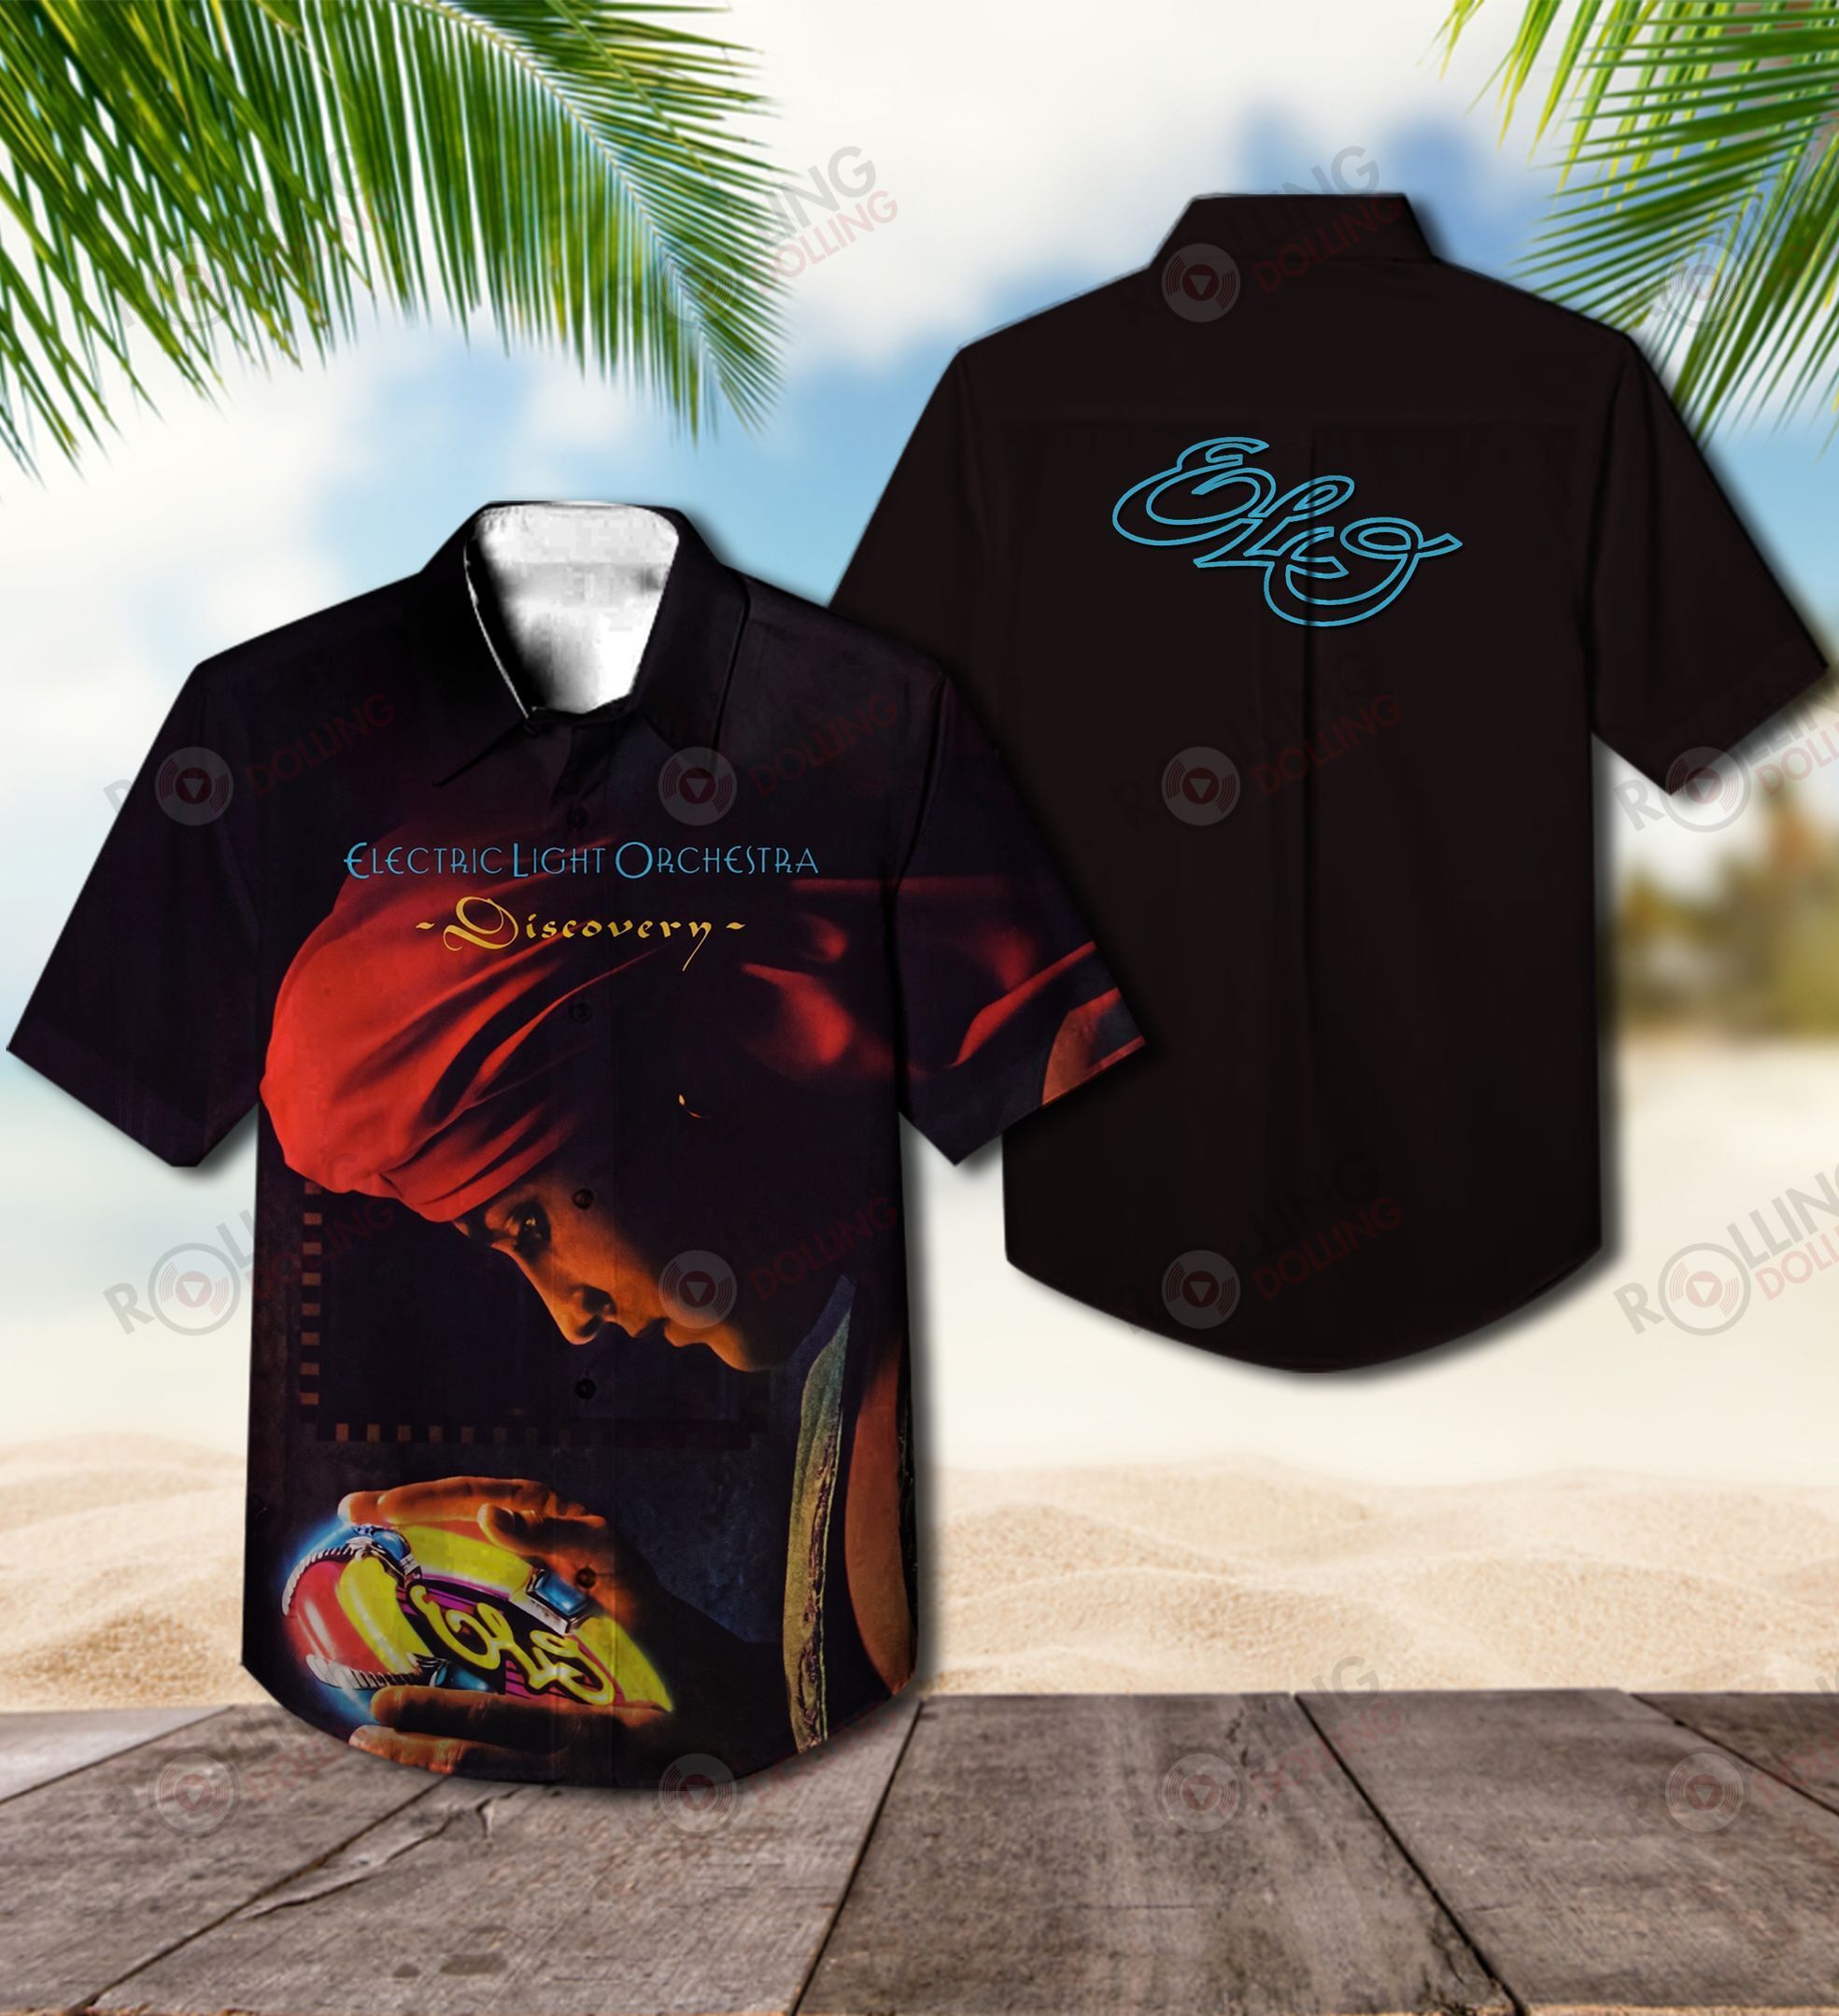 The Hawaiian Shirt is a popular shirt that is worn by Rock band fans 2